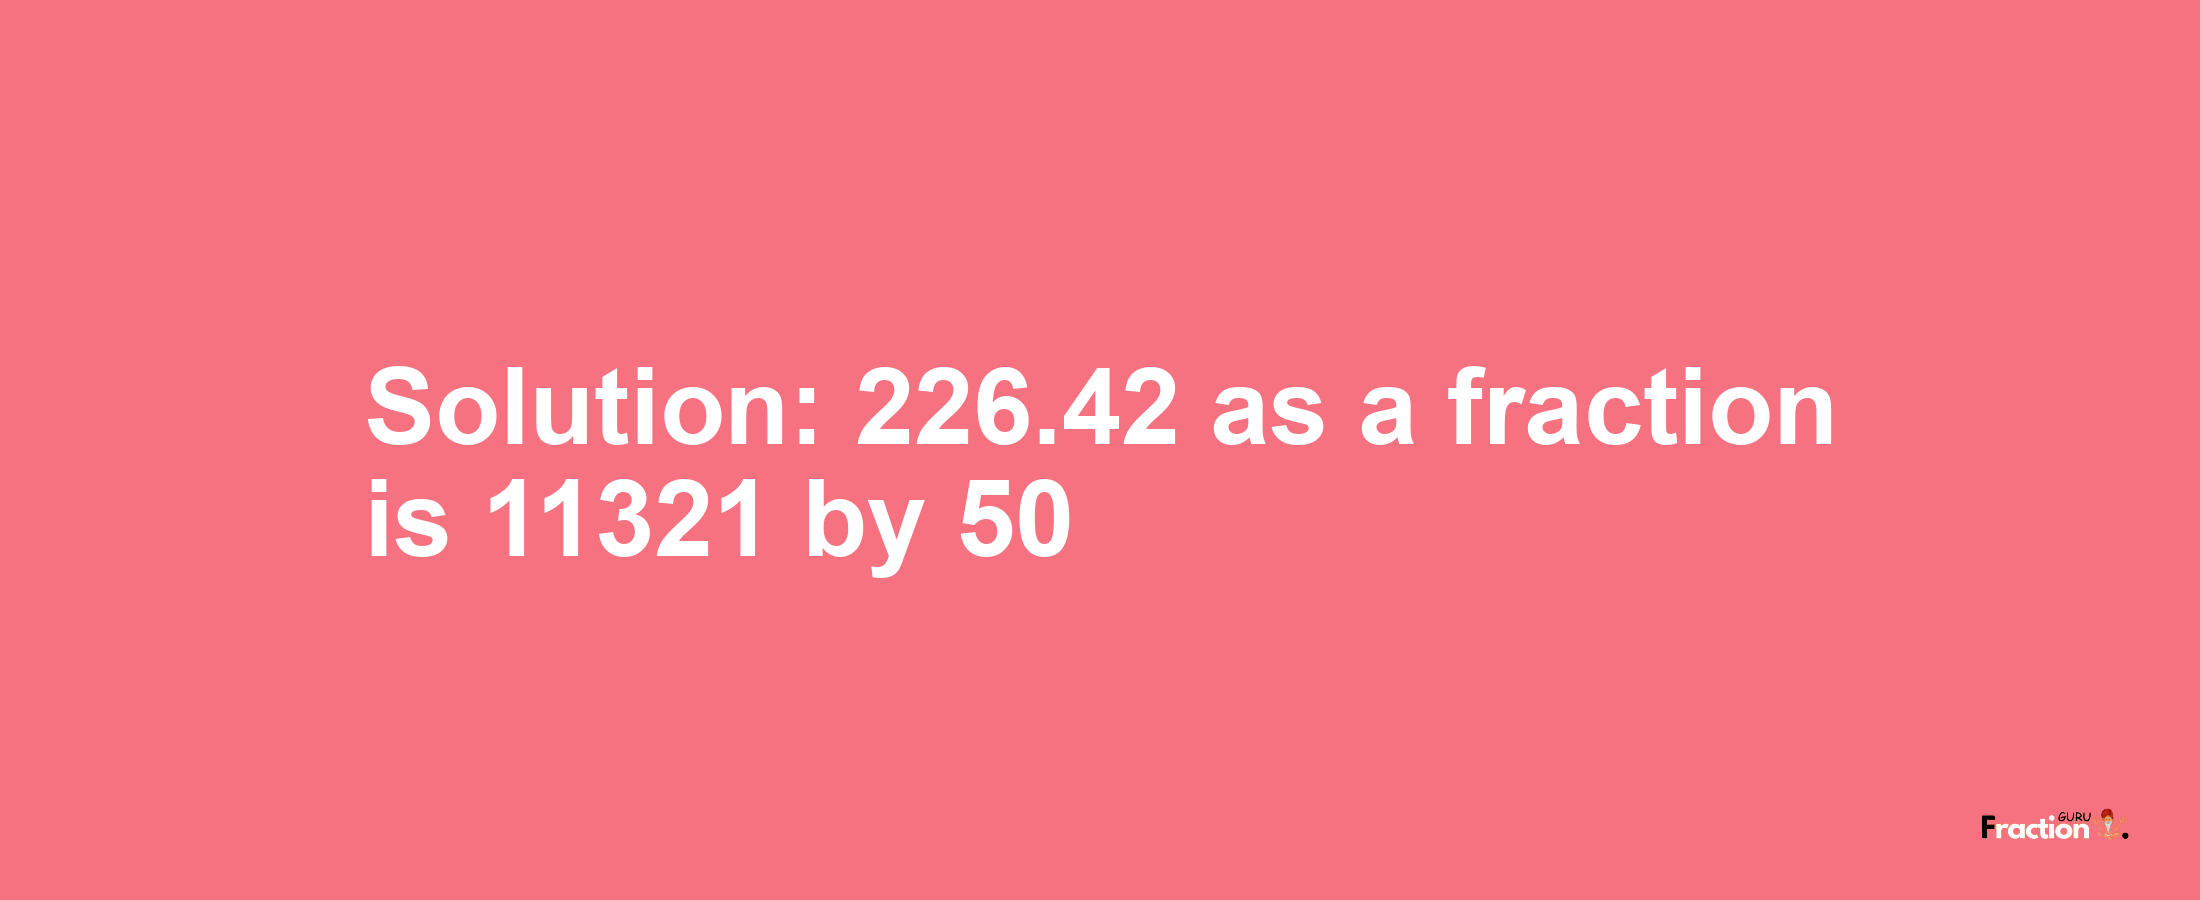 Solution:226.42 as a fraction is 11321/50